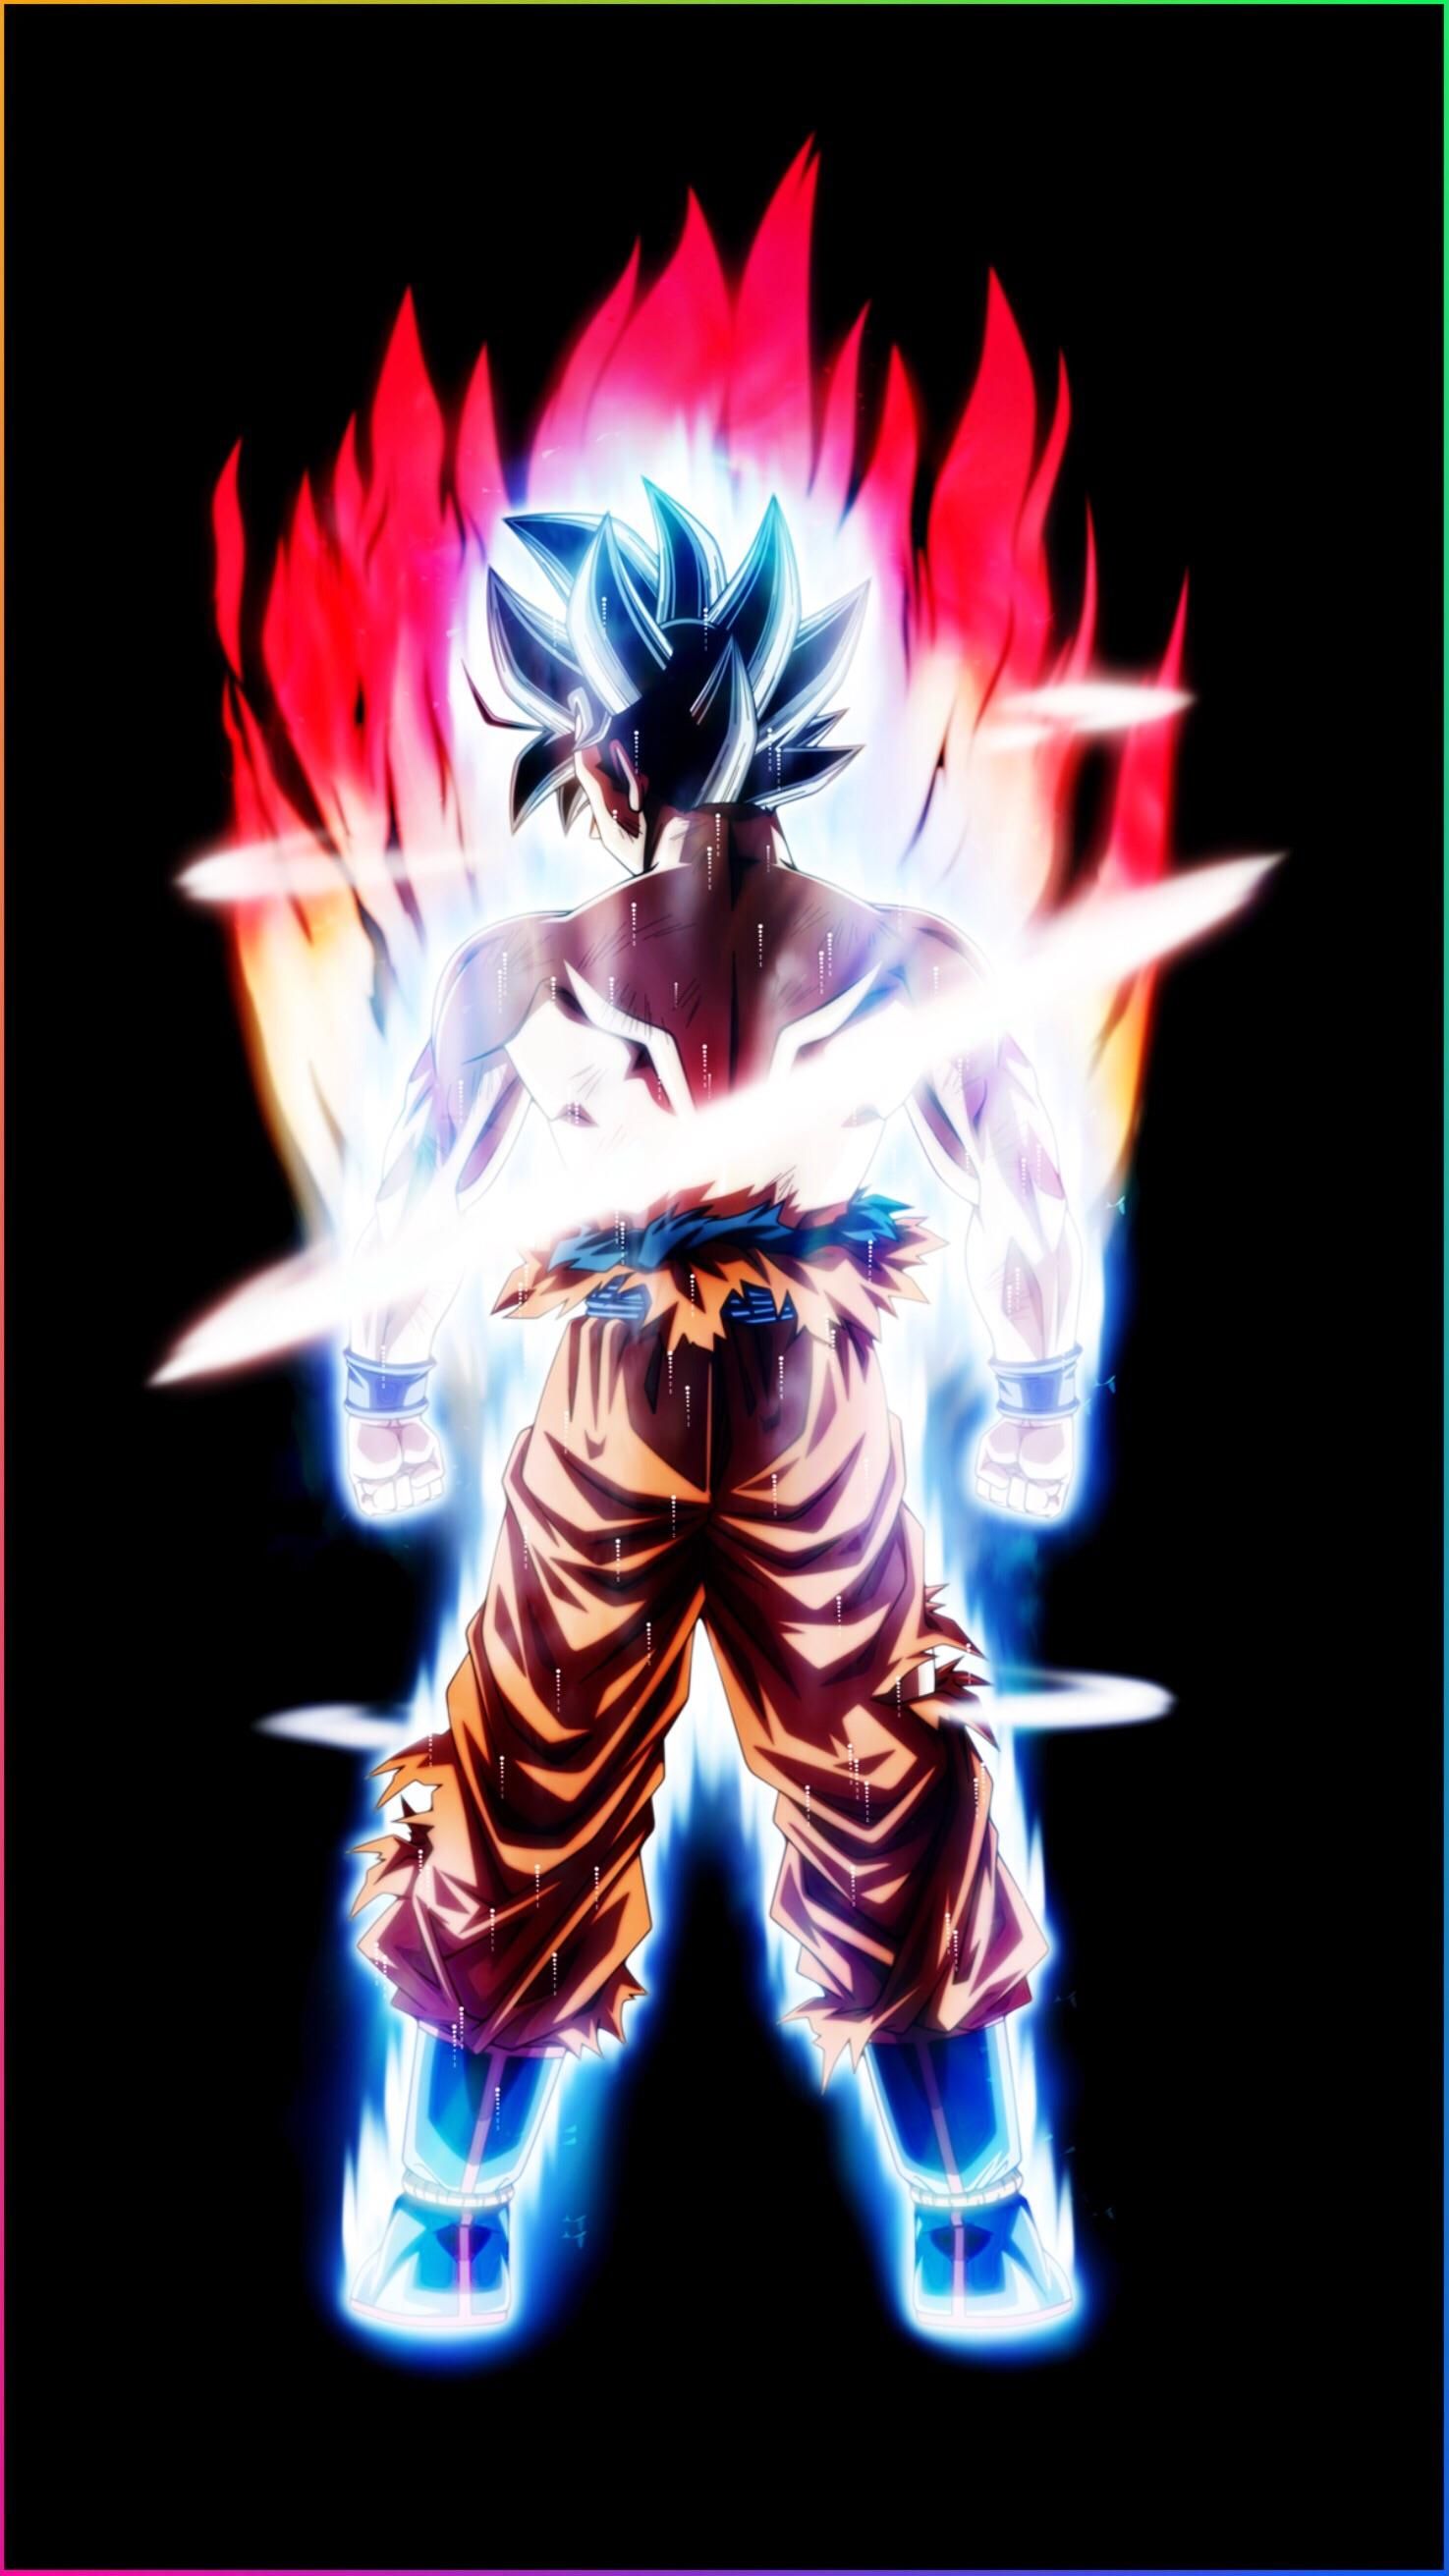 Ultra Instinc background iPhone [1475 x 2326] (i.redd.it) submitted by kenchys to /. Dragon ball super wallpaper, Anime dragon ball super, Dragon ball wallpaper